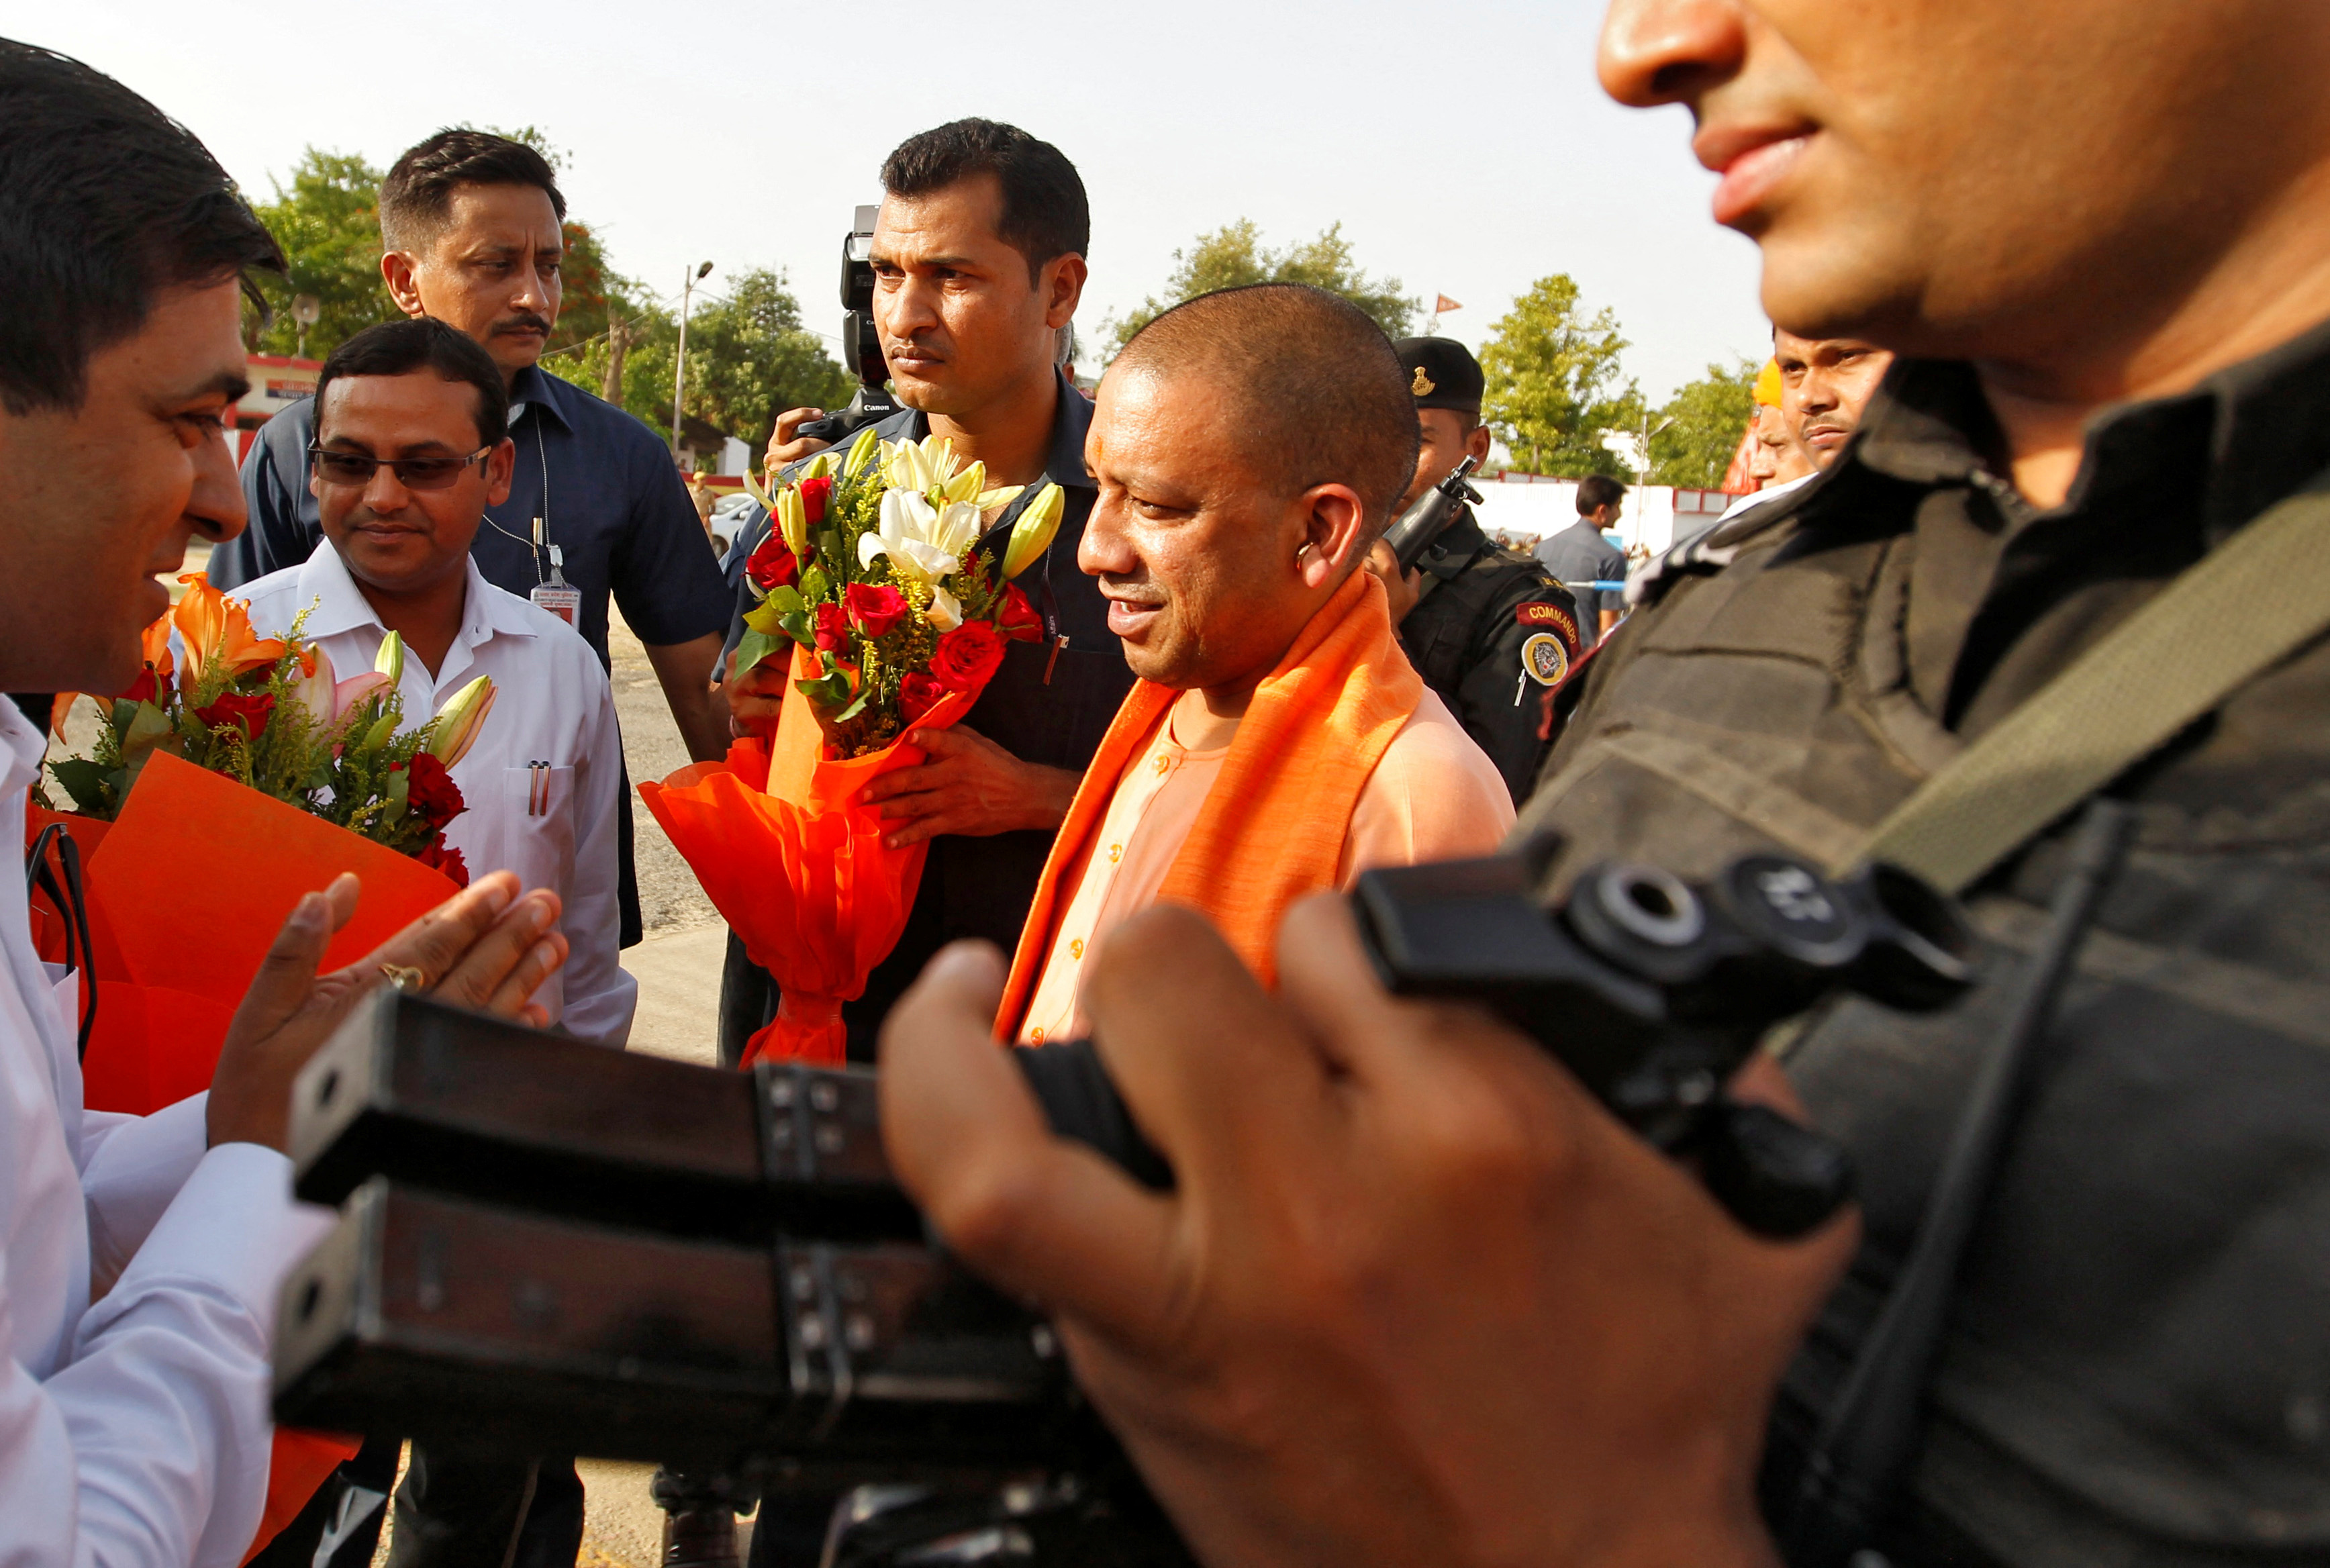 Yogi Adityanath, Chief Minister of India's most populous state of Uttar Pradesh, is welcomed by an official after he arrived for a two-day long visit to Allahabad